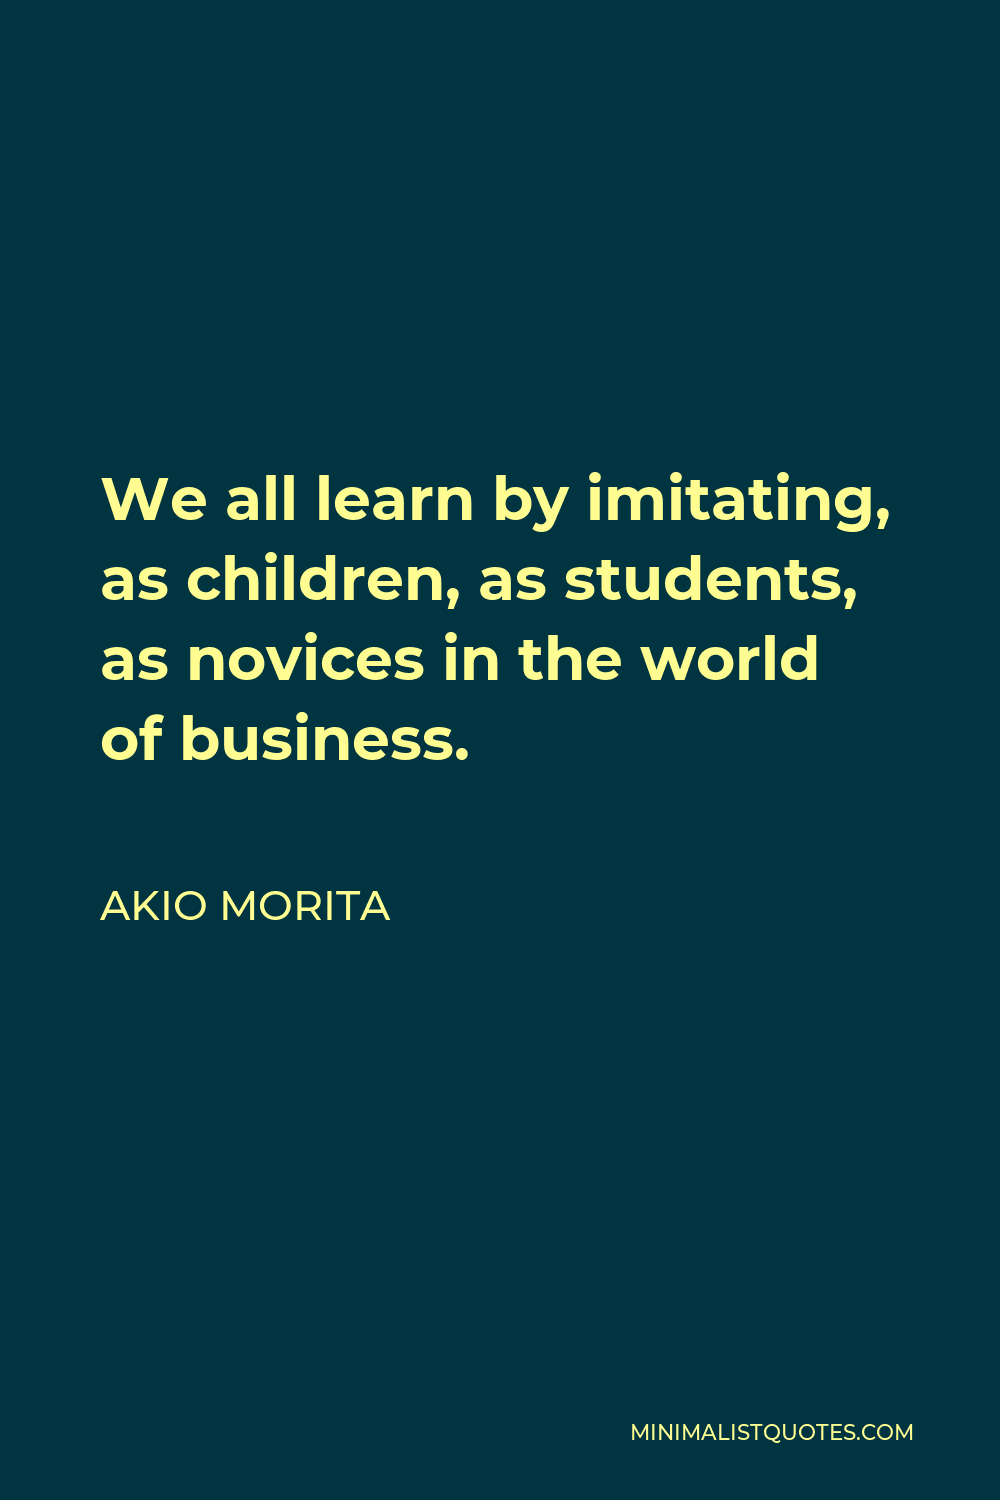 Akio Morita Quote - We all learn by imitating, as children, as students, as novices in the world of business.